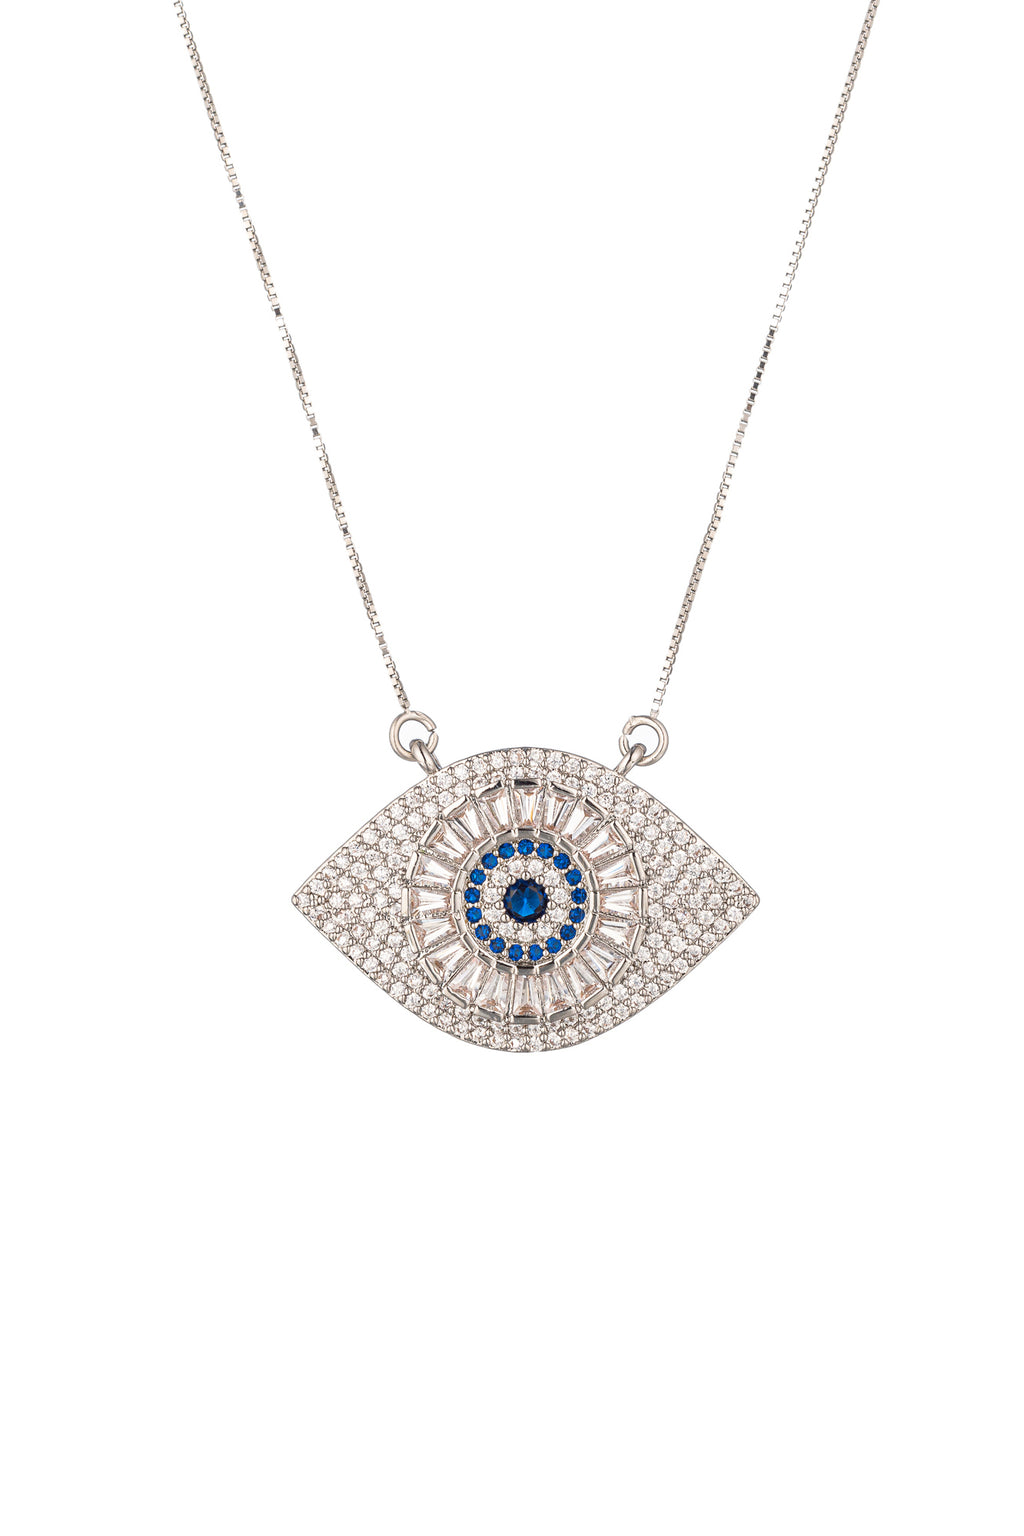 Sterling silver necklace with an evil eye brass pendant that is studded with CZ crystals.